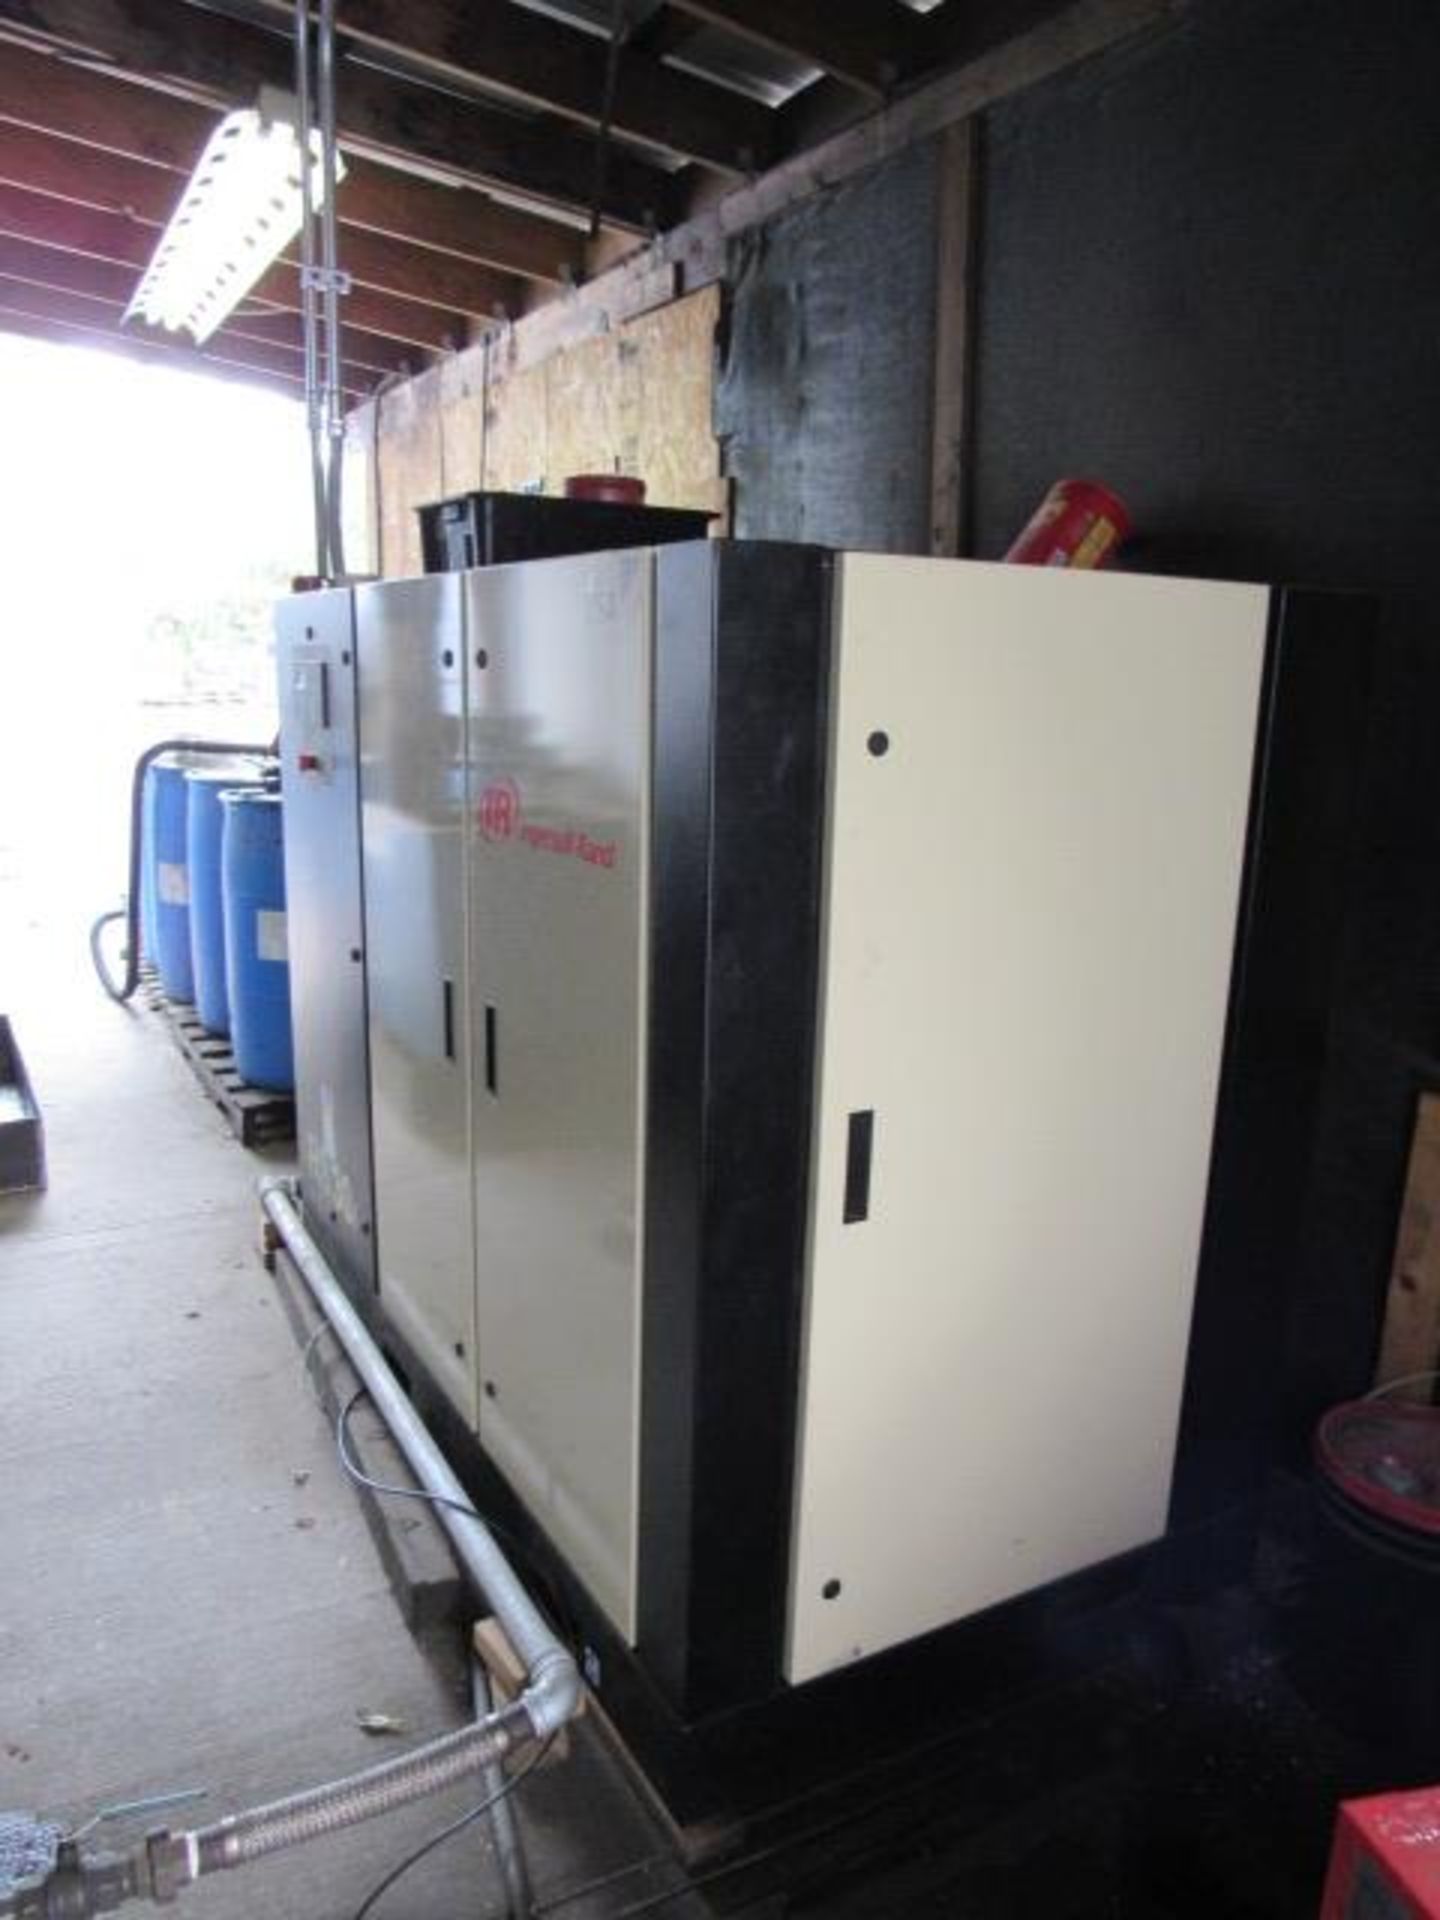 Ingersoll Rand RS|30i 40hp Rotary Screw Air Compressor with Air Dryer - Image 6 of 6